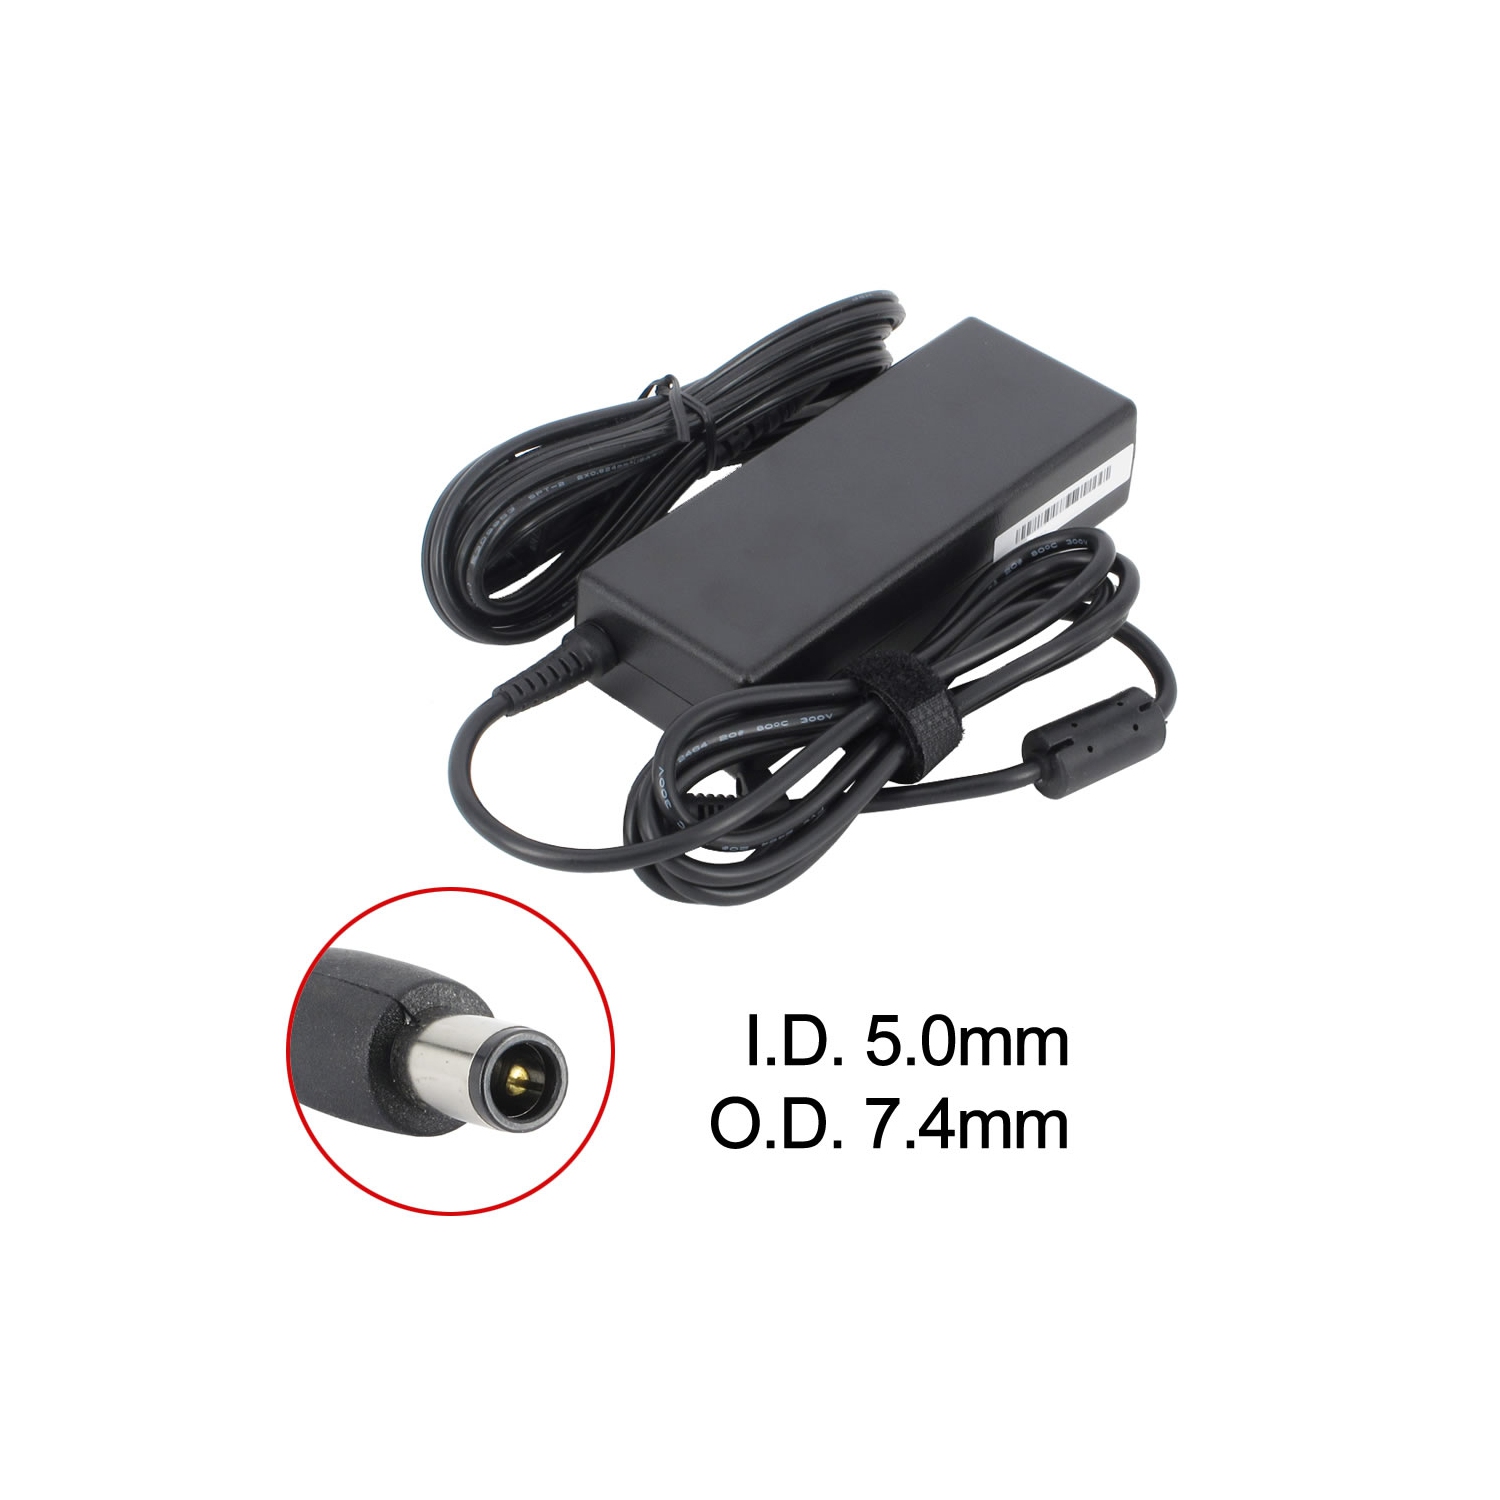 New Laptop Ac Adapter For Dell Inspiron 17r Se 7720 0f7970 310 7696 310 9763 462 7635 Df263 Fa90pm139 Nnwp1 V1277 Best Buy Canada